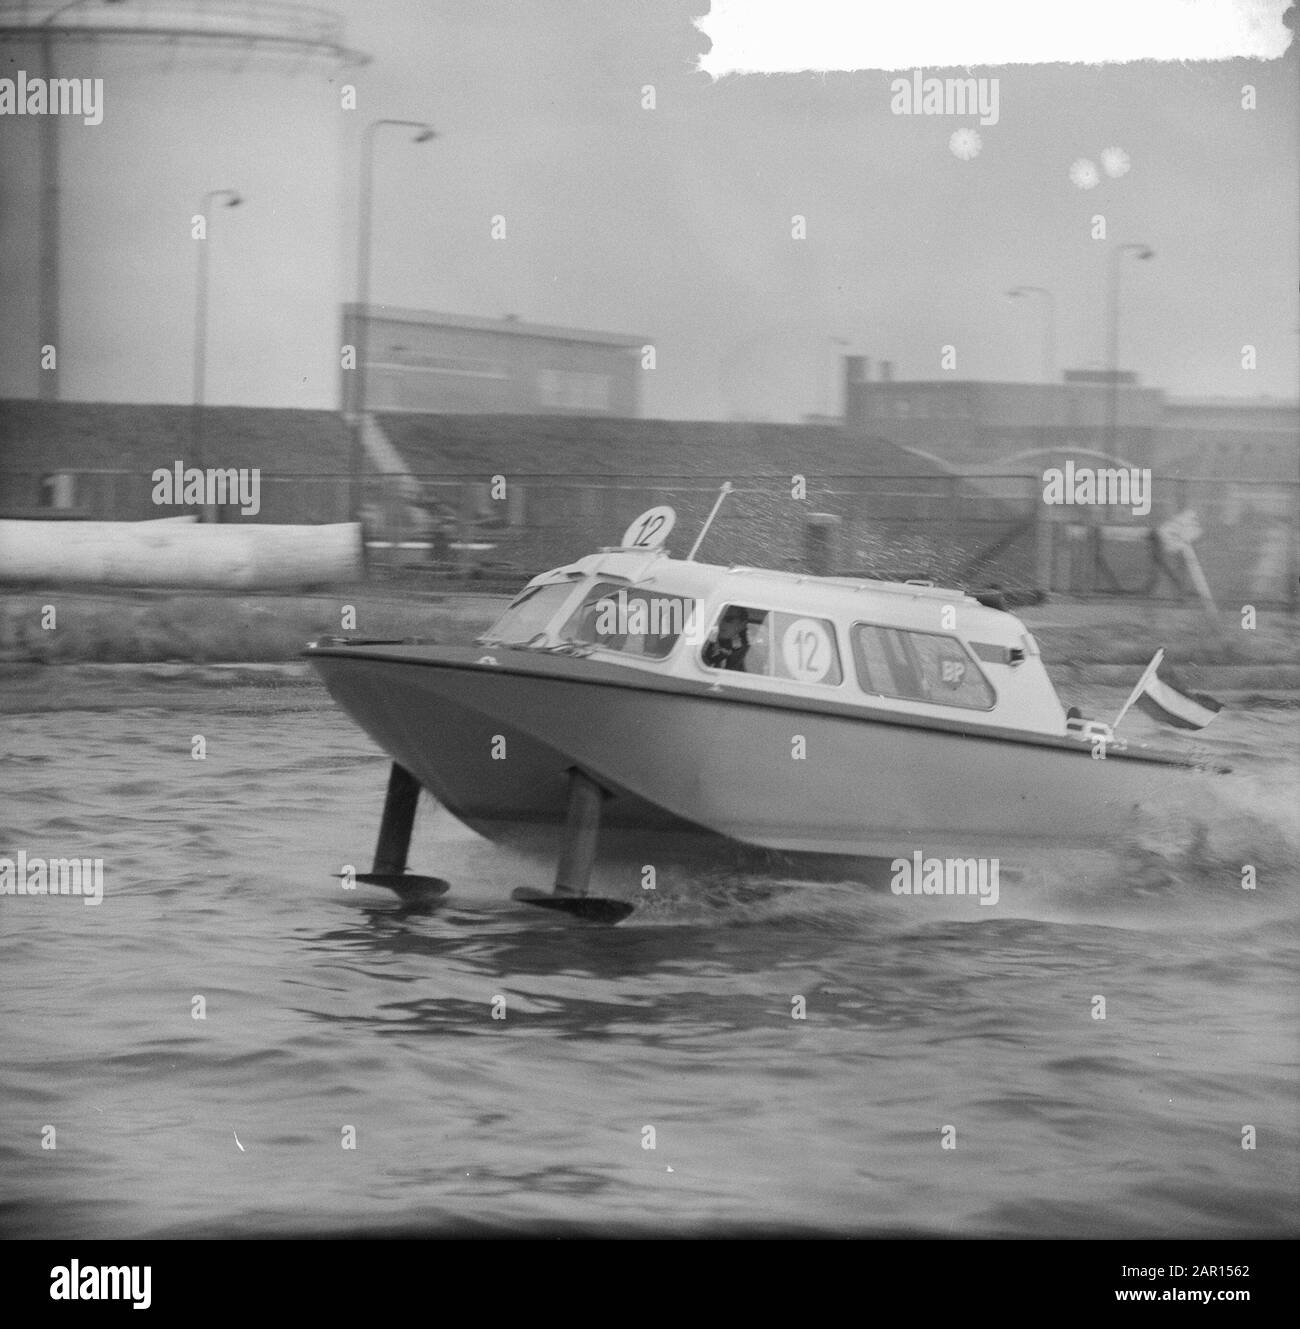 Exhibition Hiswa in the RAI, the polyester air-cushion boat Date: March 4, 1965 Keywords: boats, exhibitions Institution name: HISWA Stock Photo